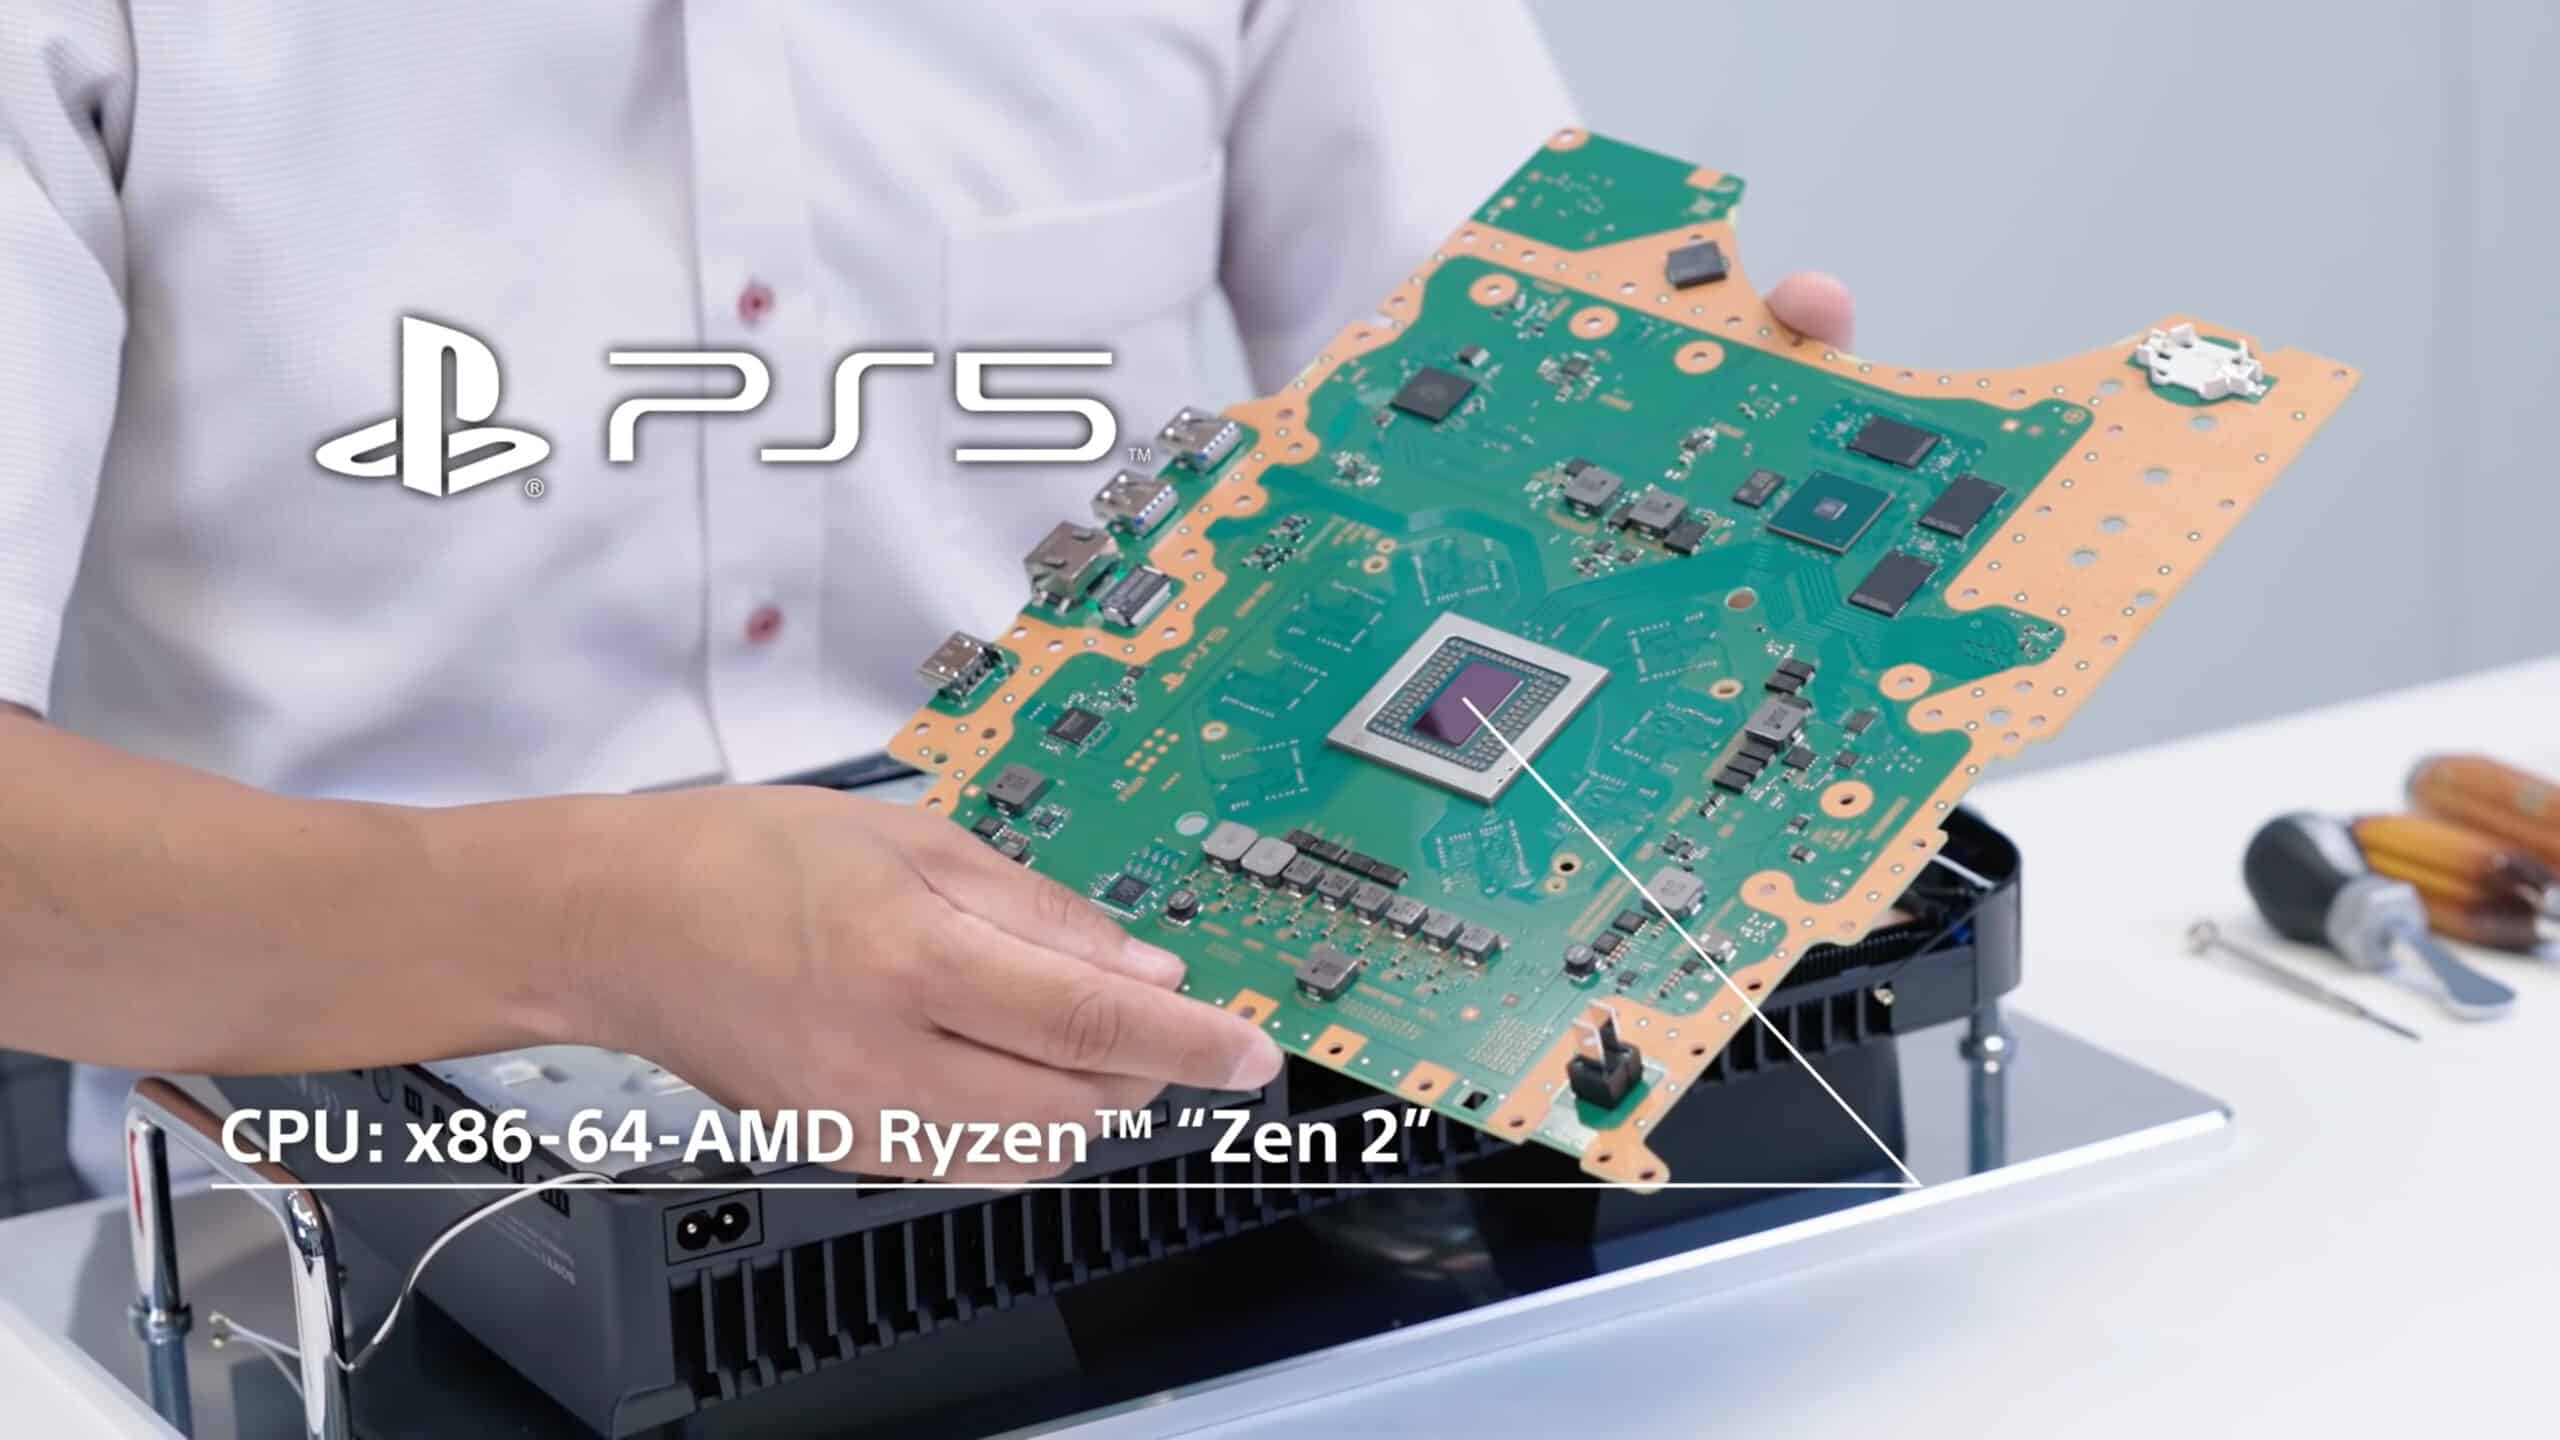 What Is Inside The PlayStation 5 Console